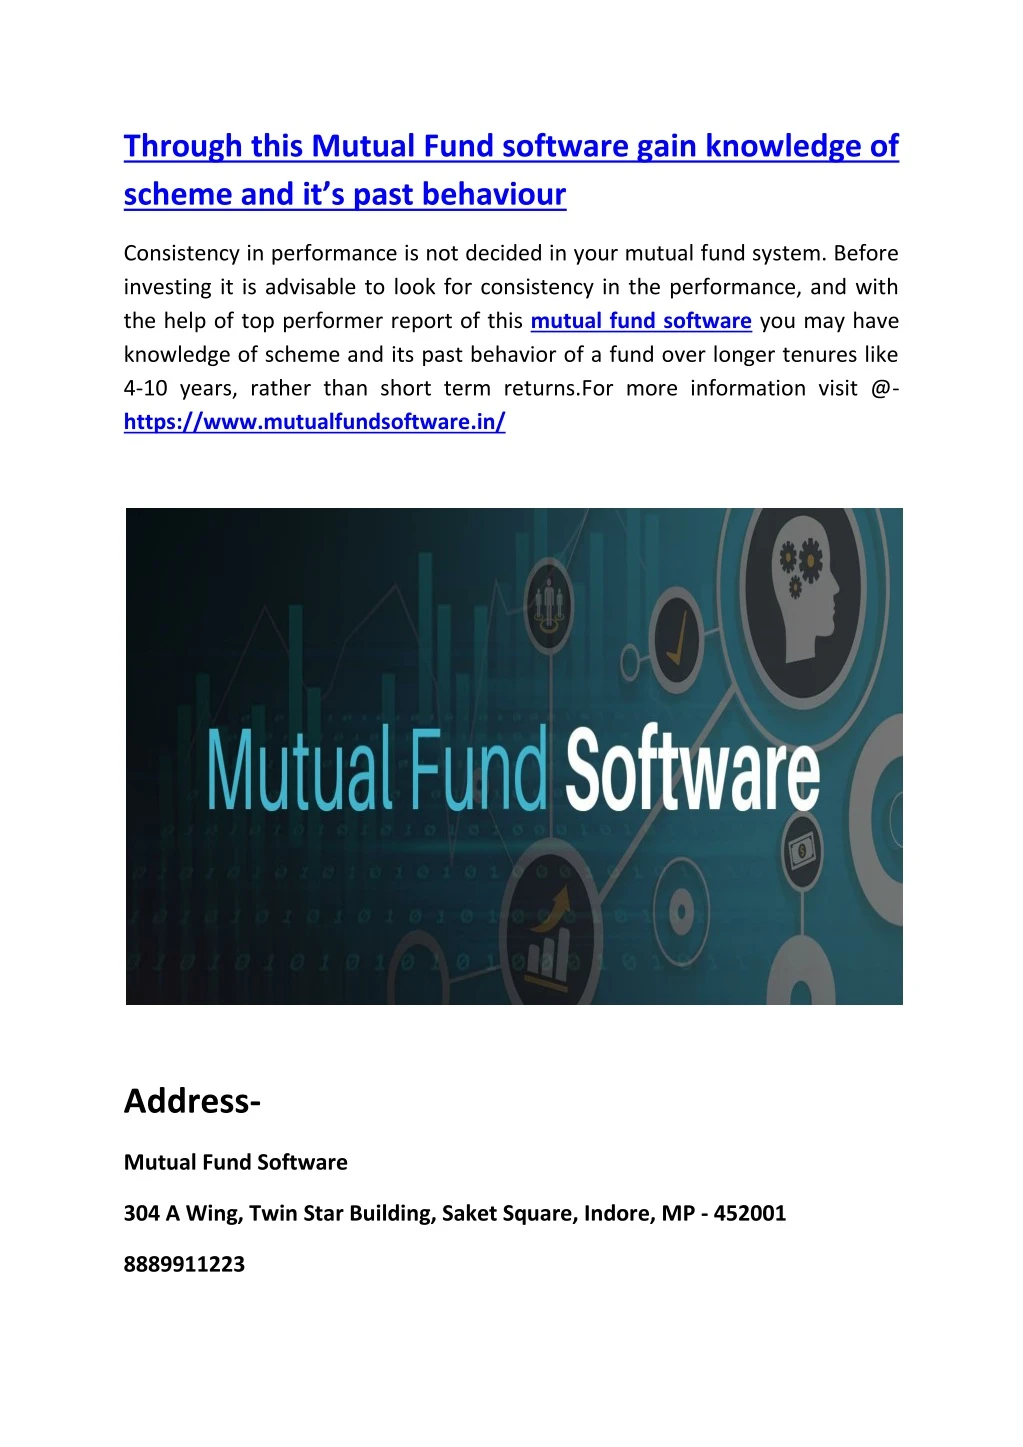 through this mutual fund software gain knowledge